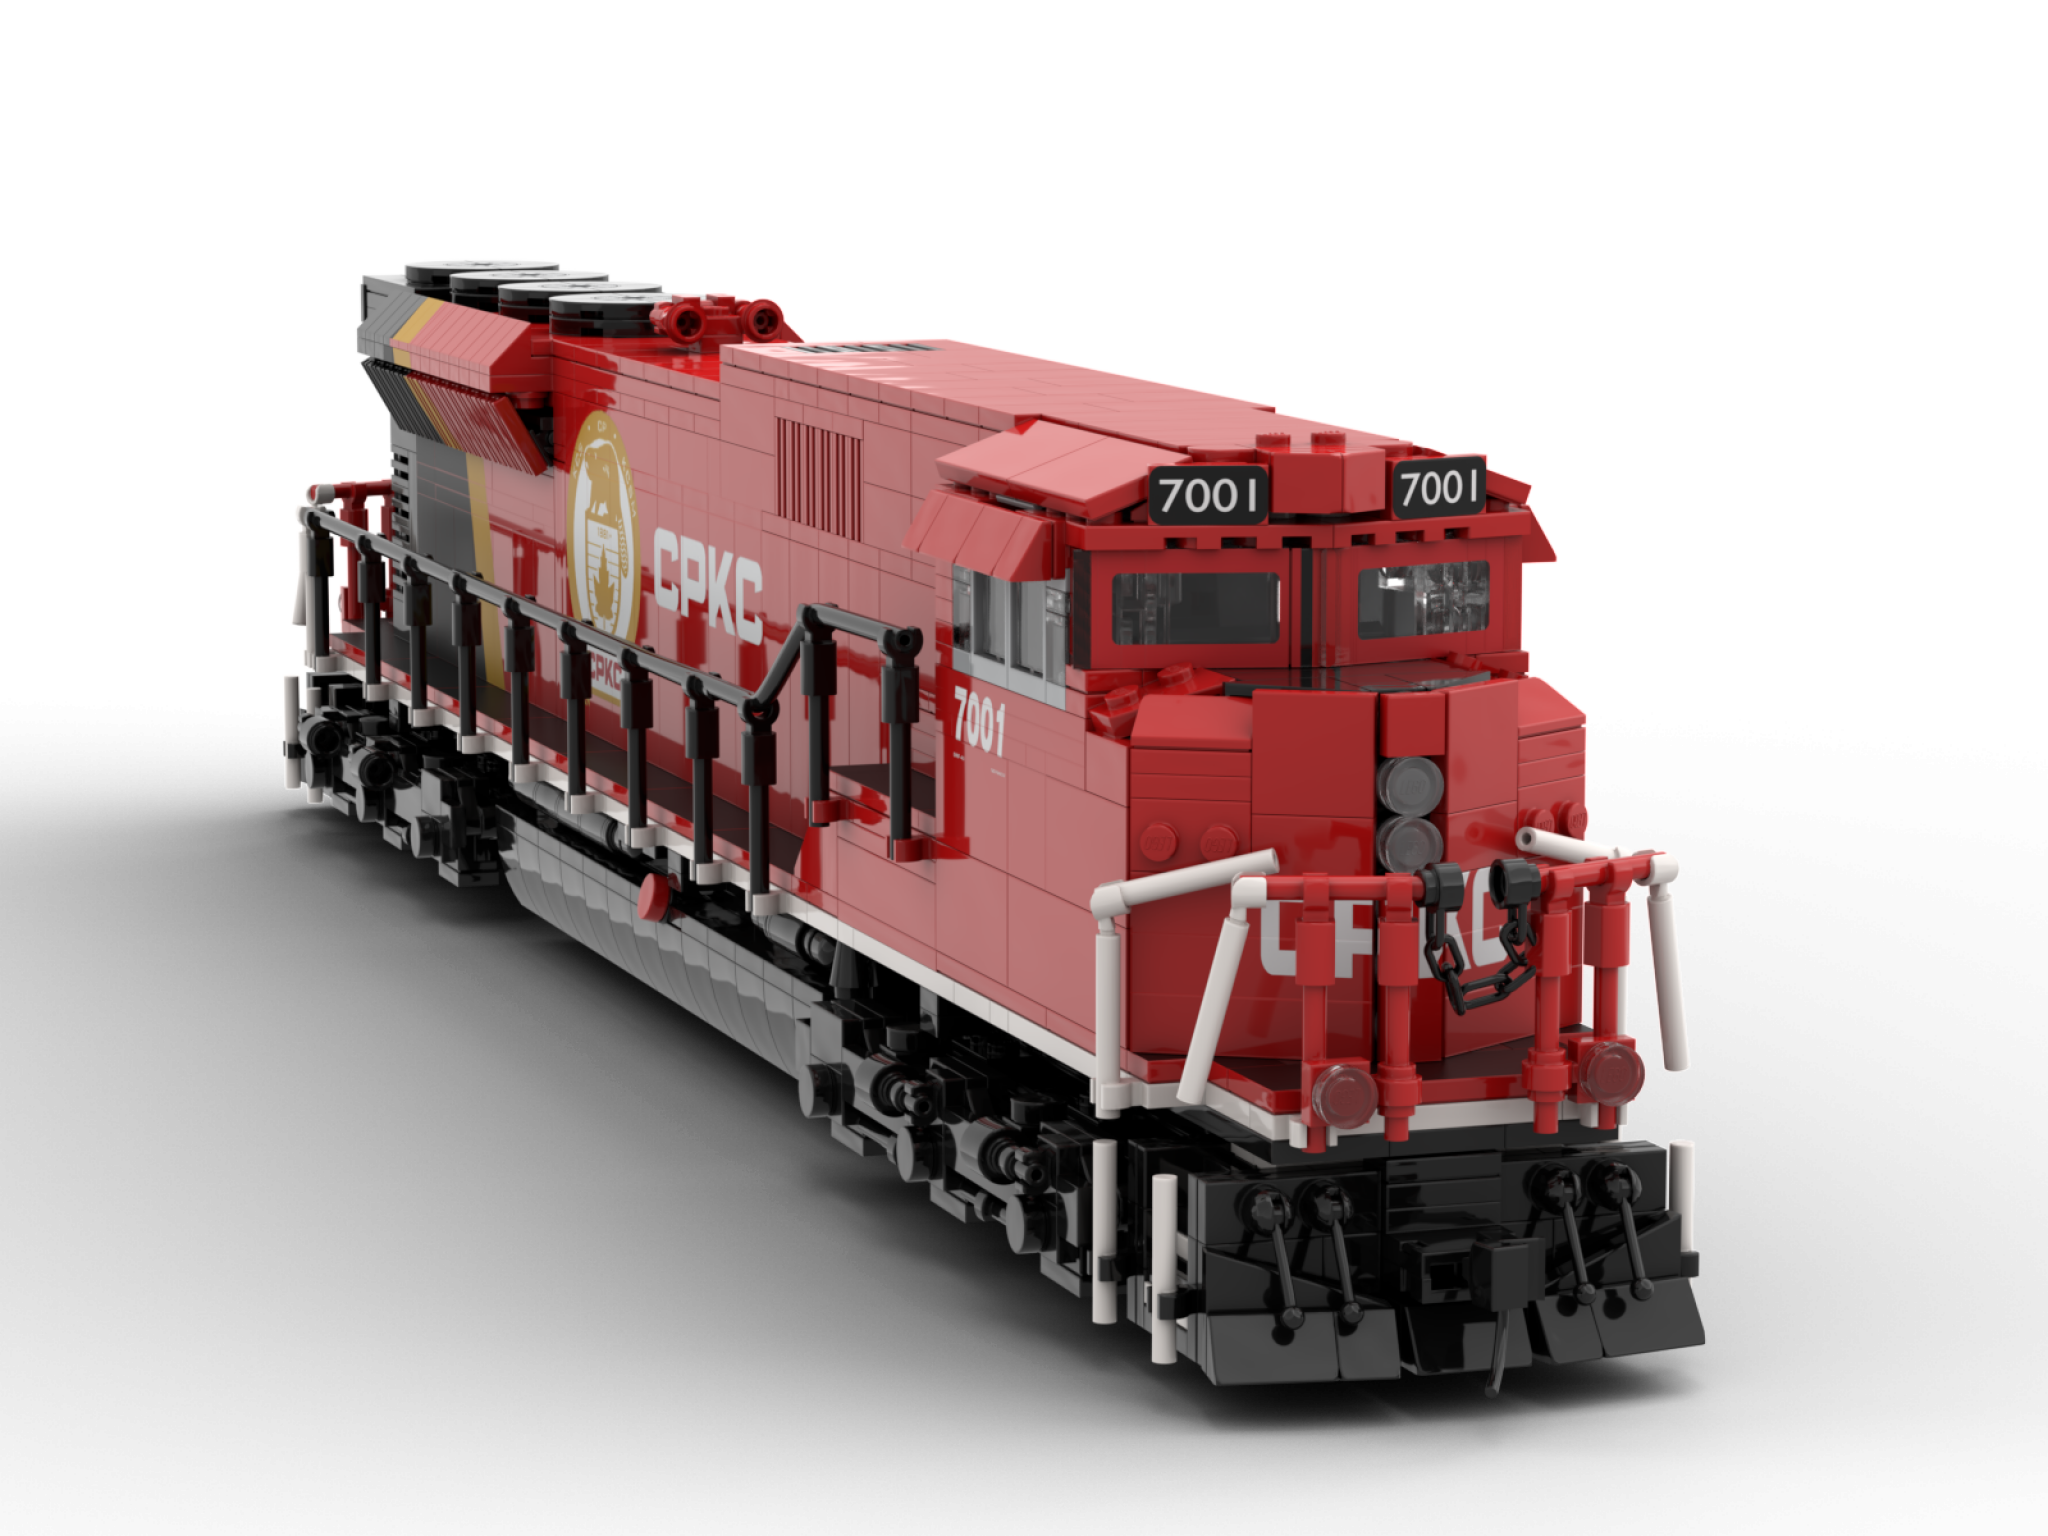 Canadian Pacific CPKC SD70ACU